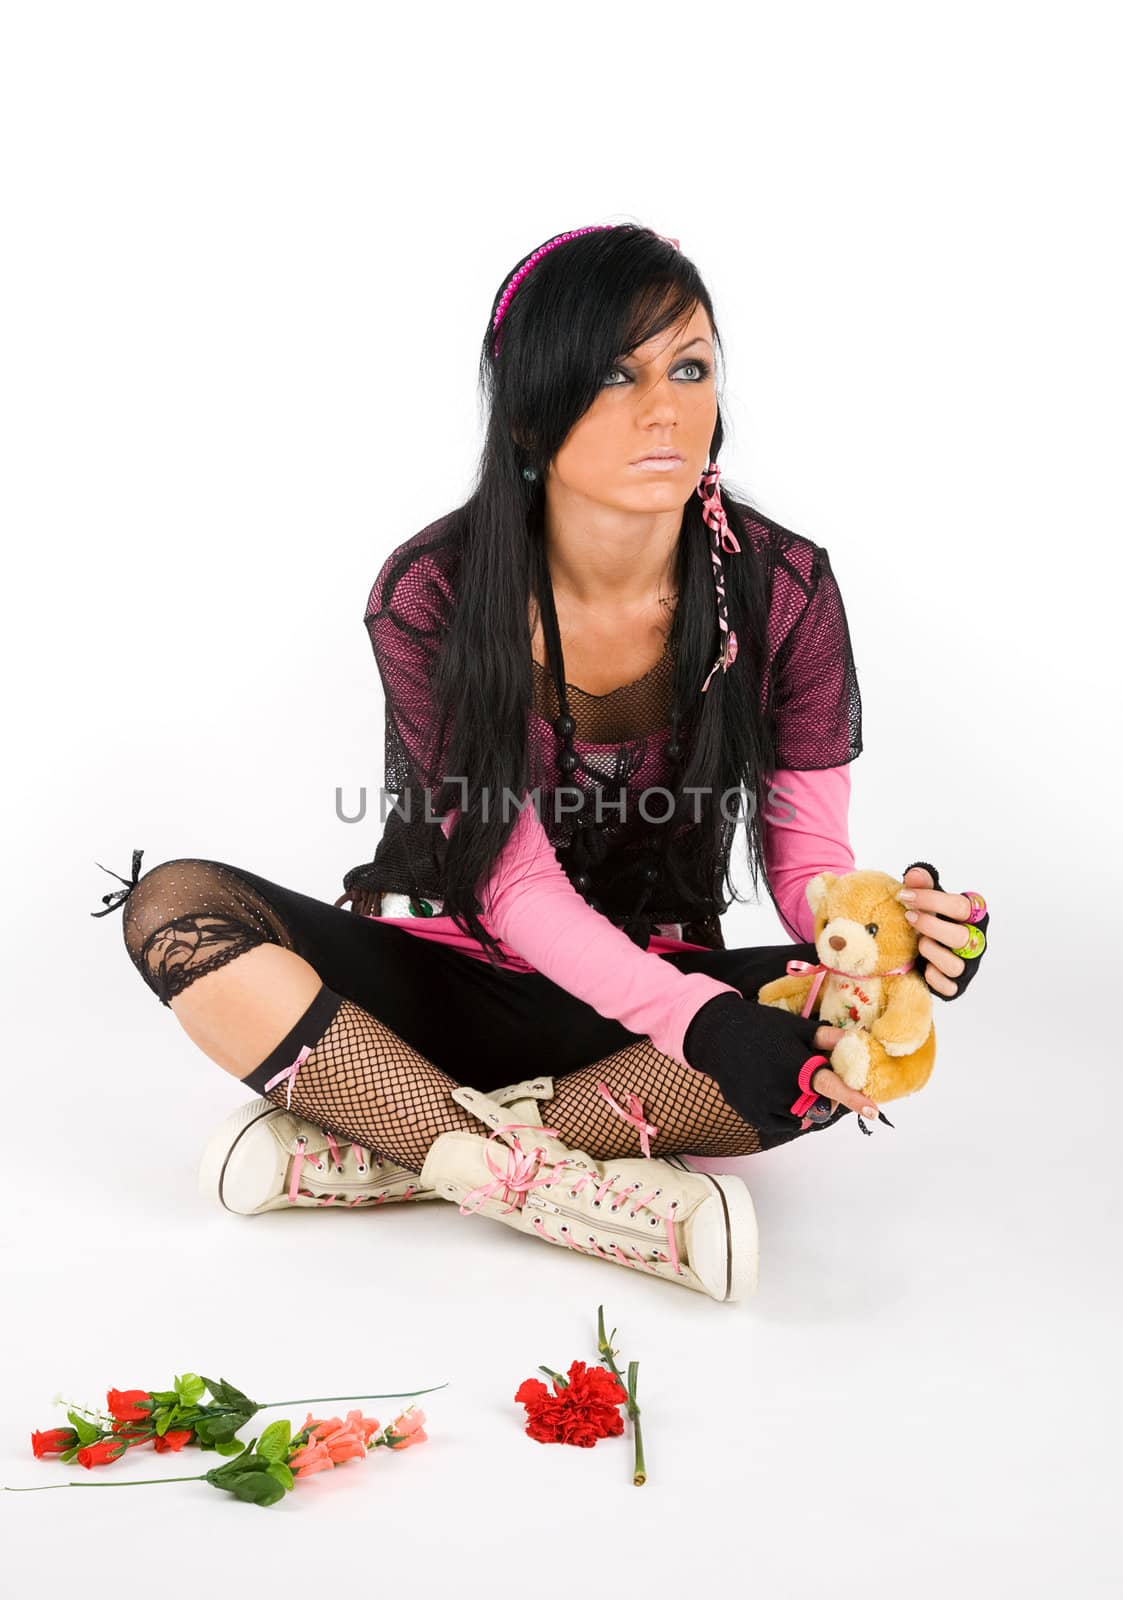 EMO girl posing with  toy bear